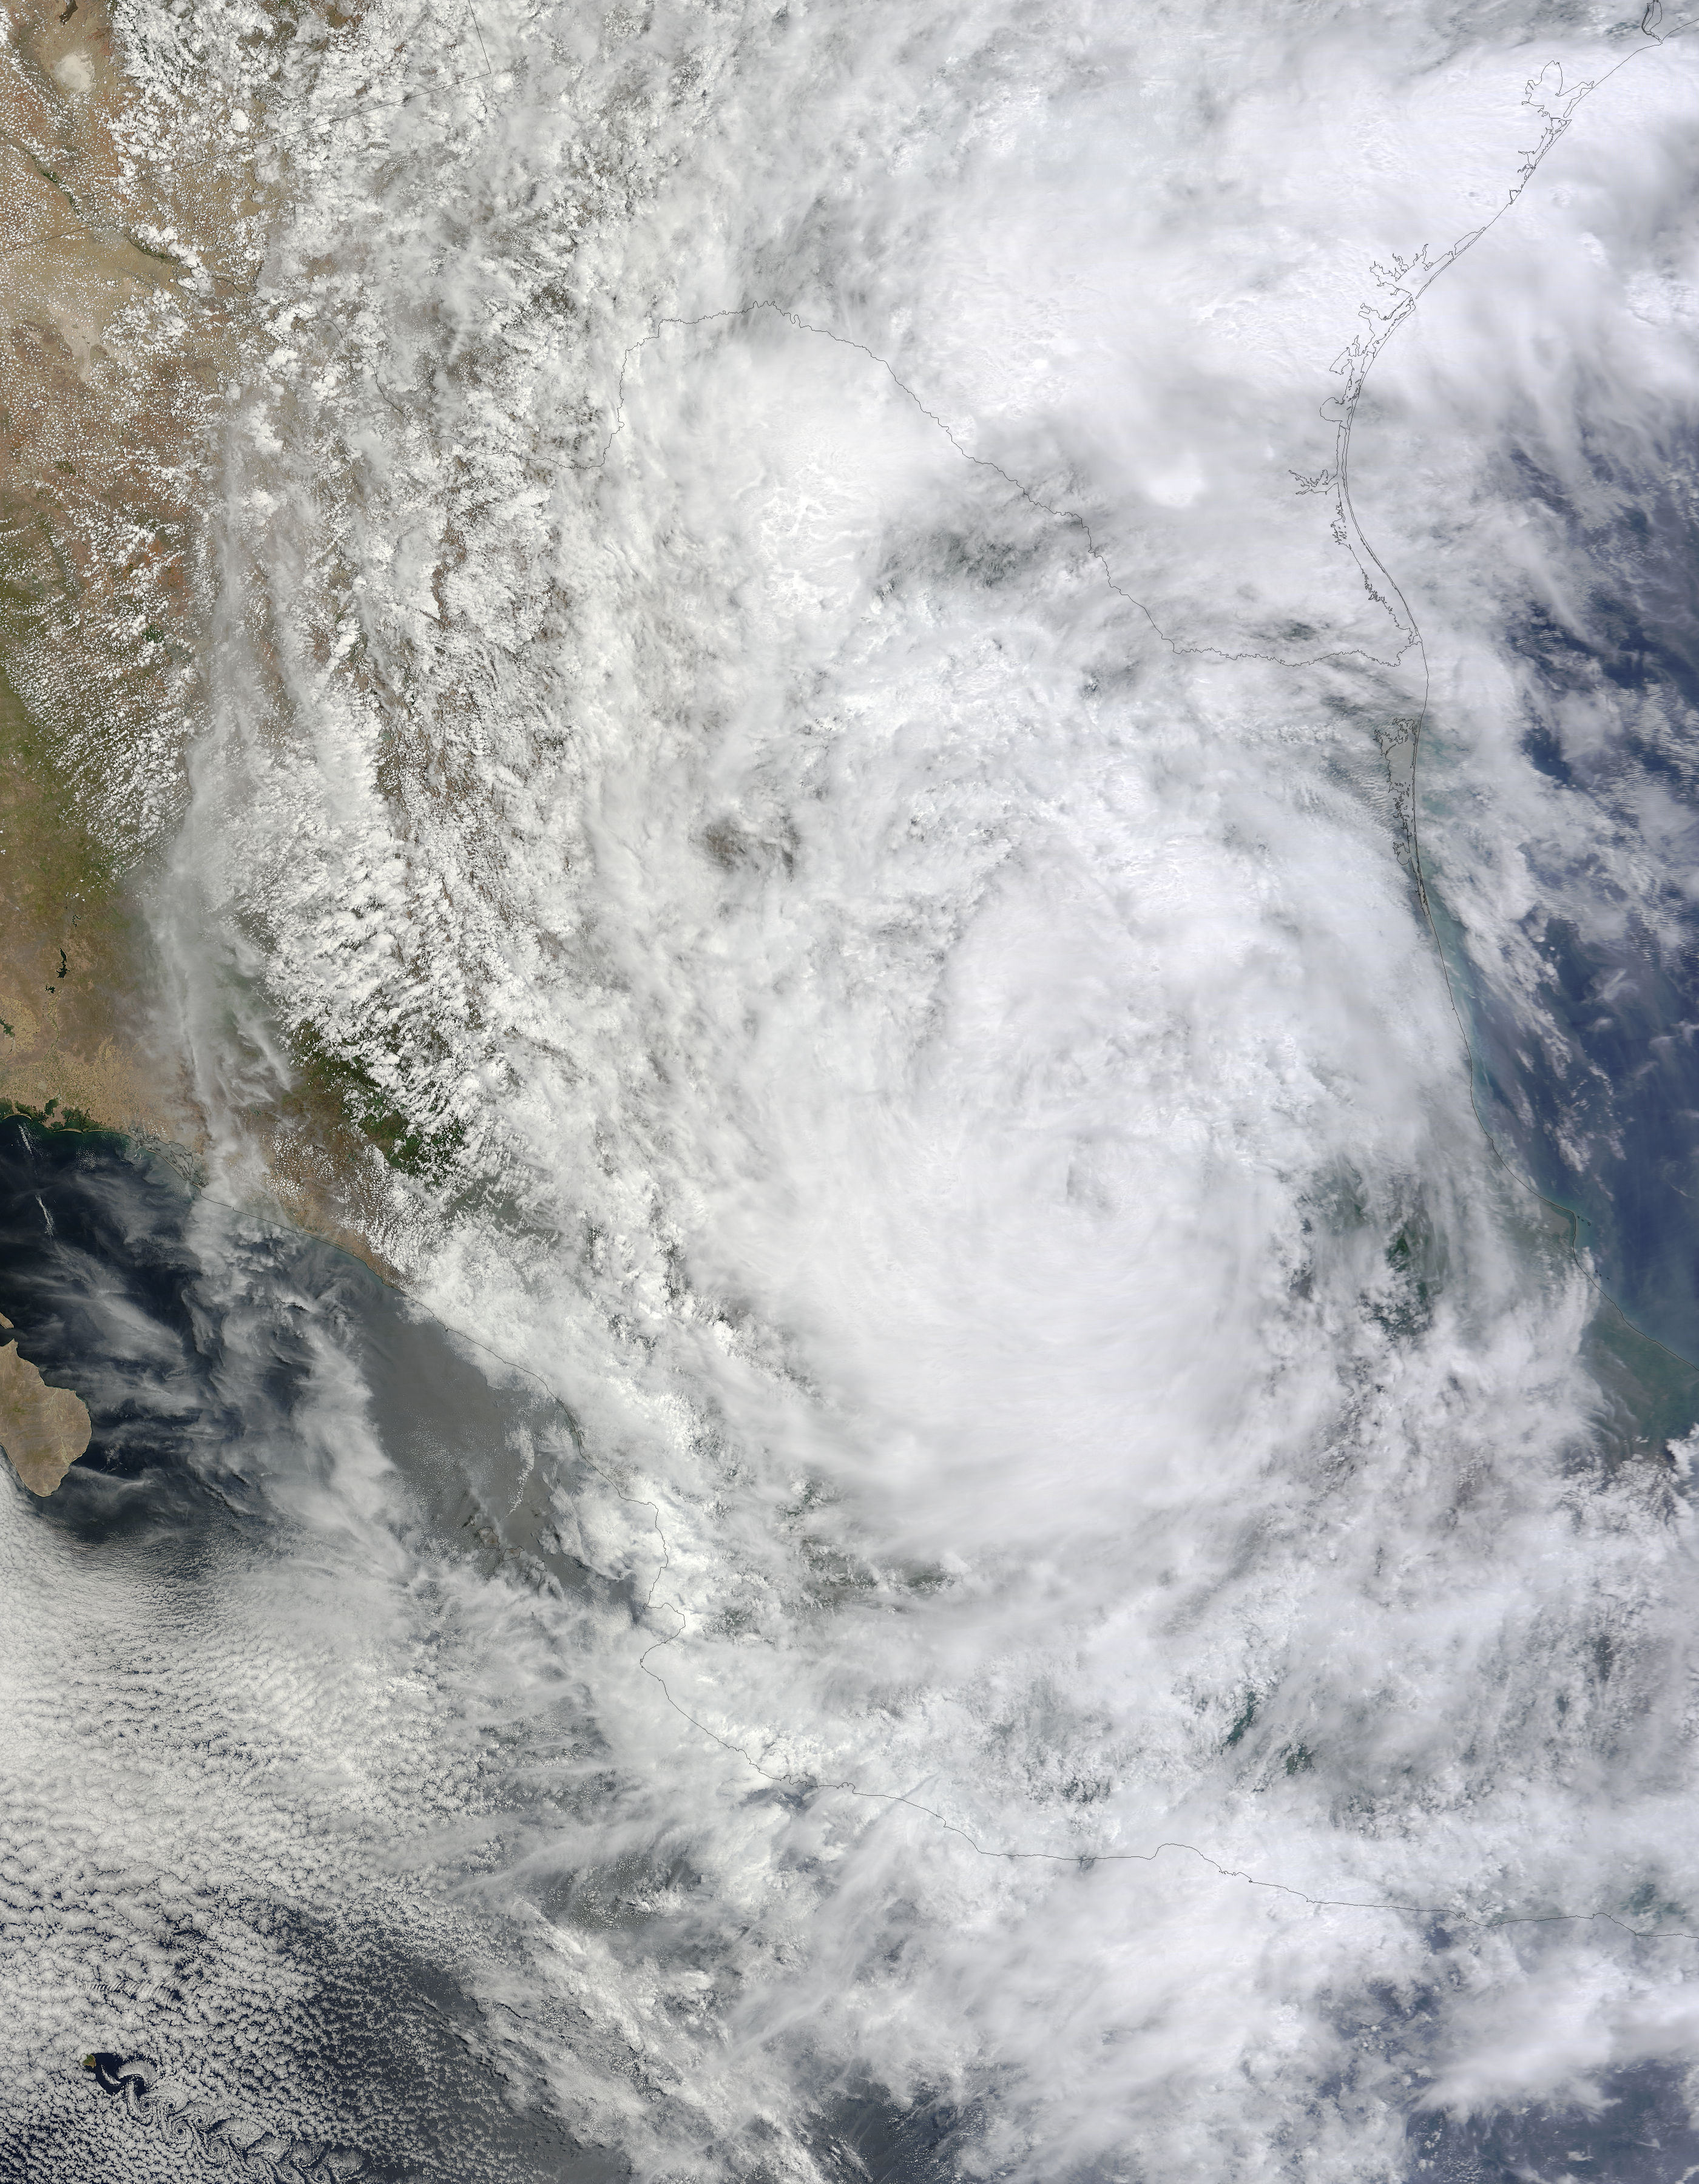 Tropical Storm Alex (01L) over Mexico - related image preview